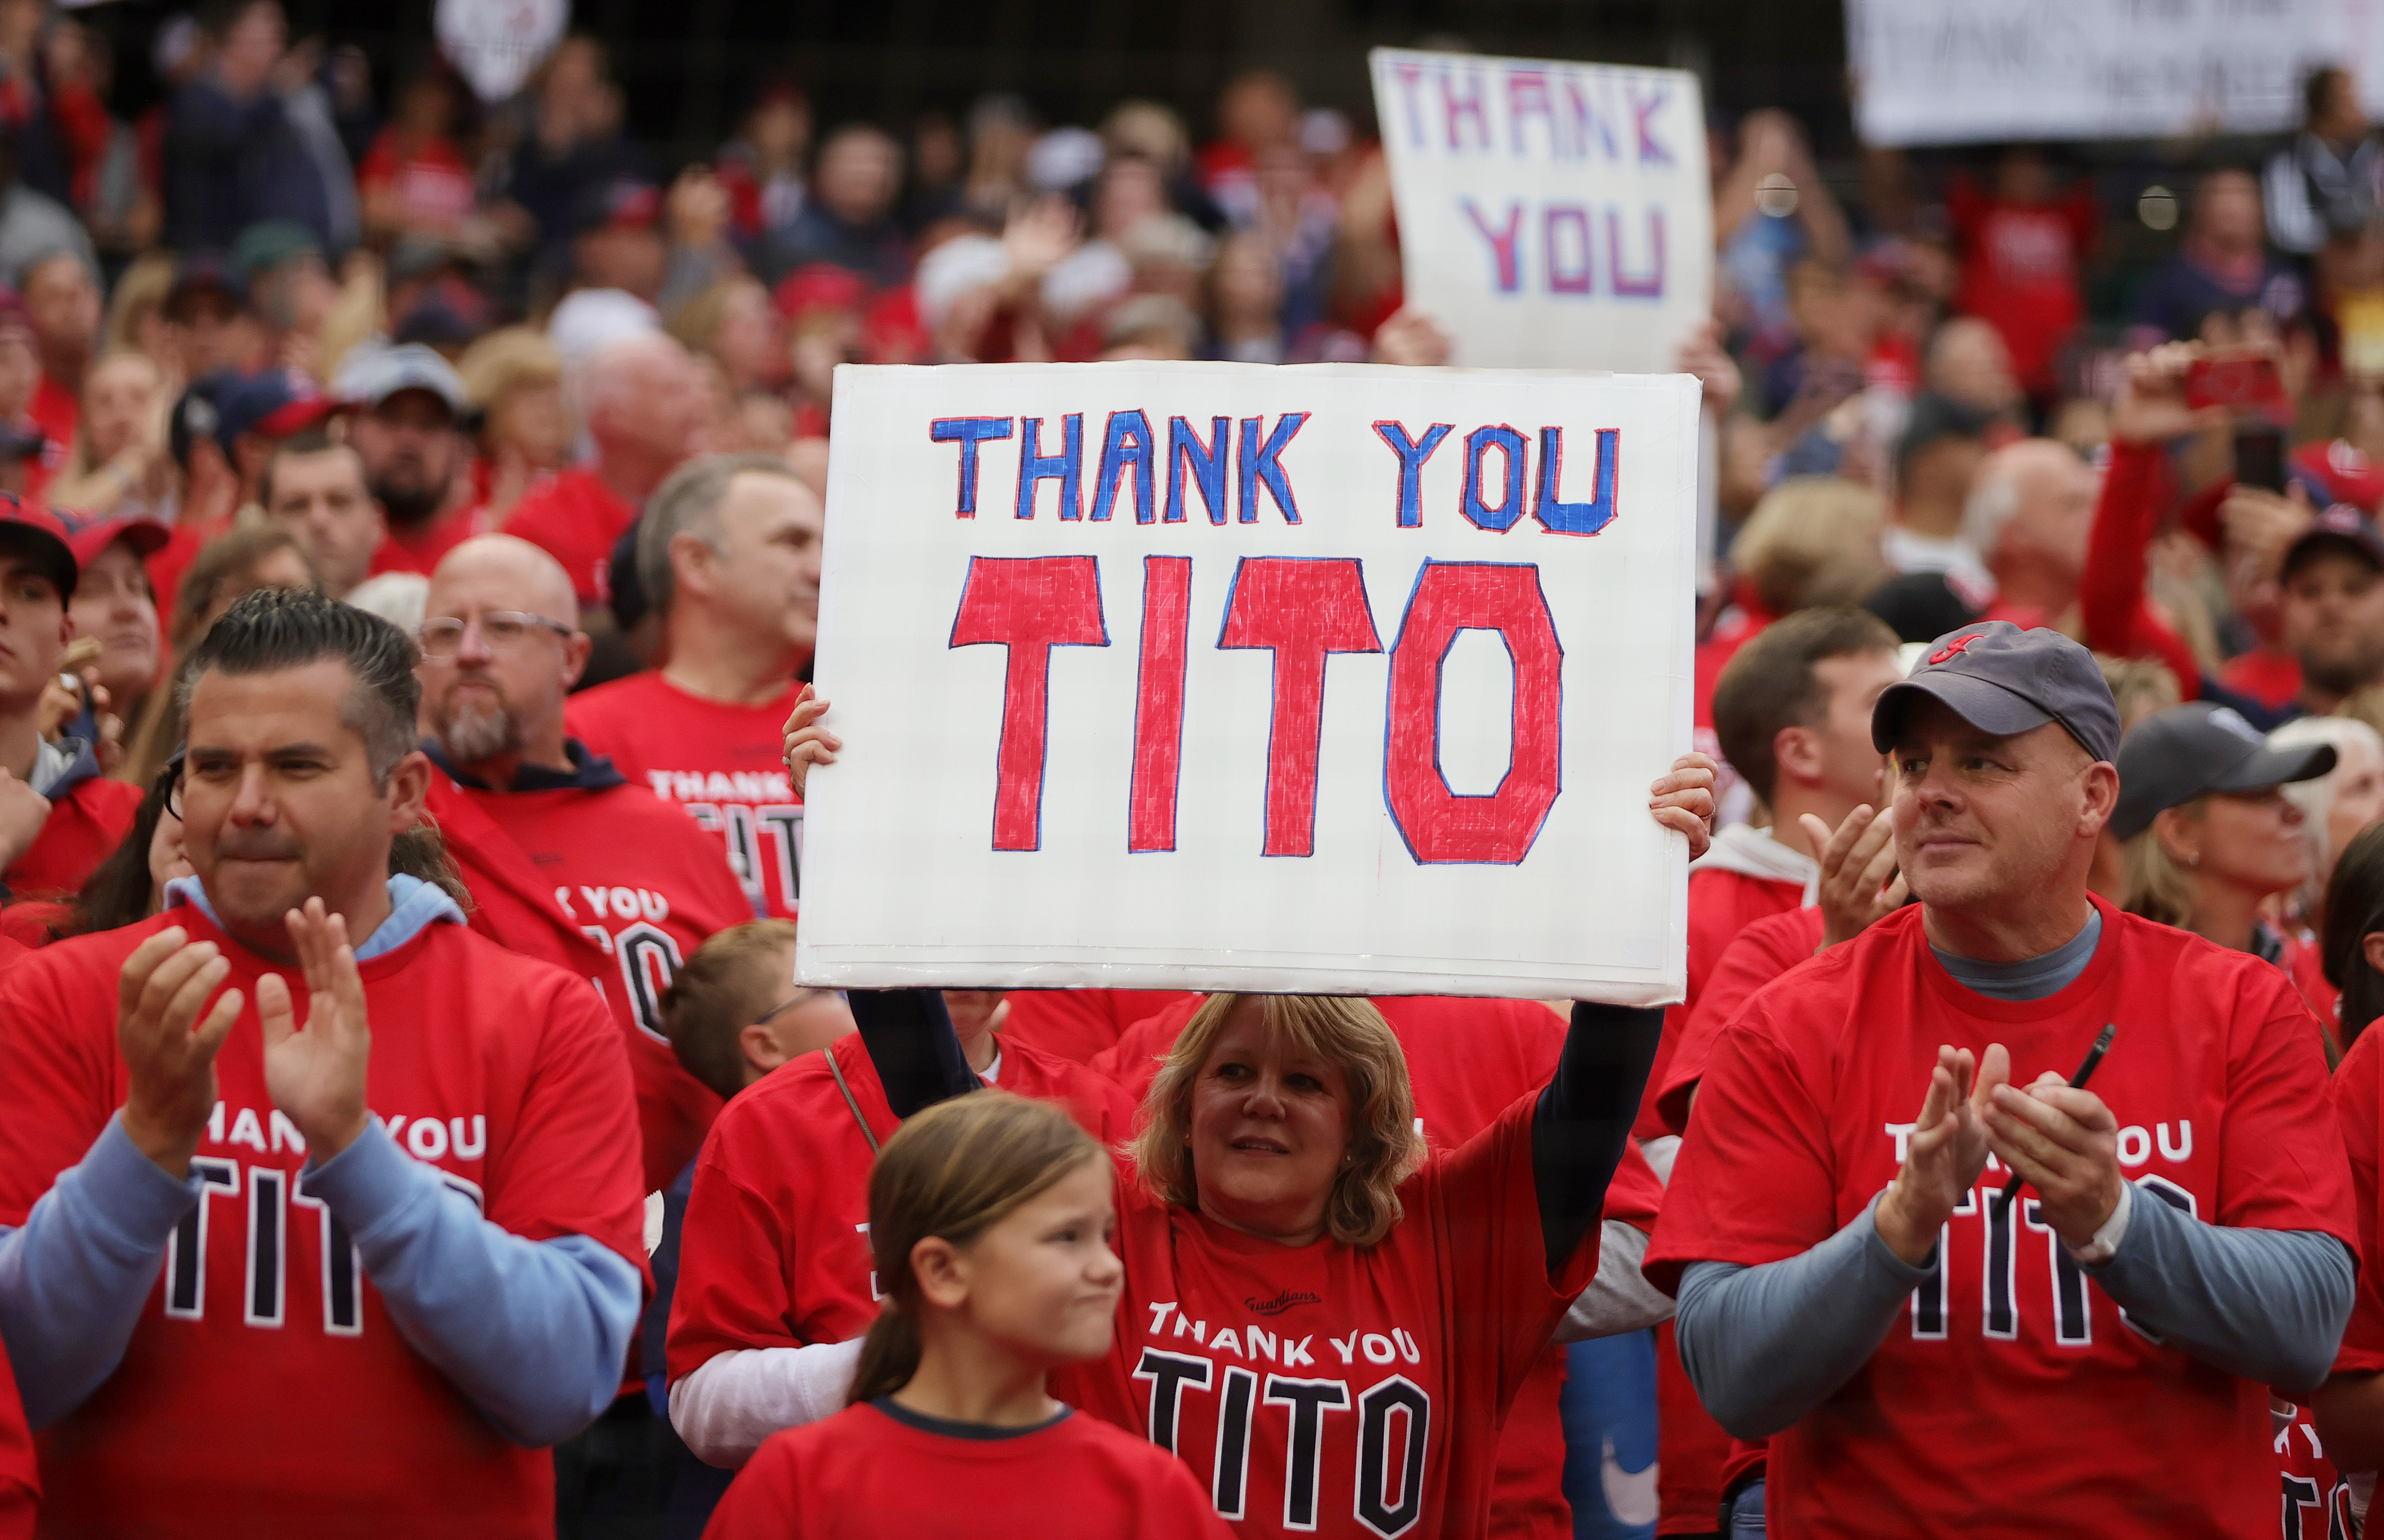 Tito by the numbers: Terry Francona's stats as a big league manager 